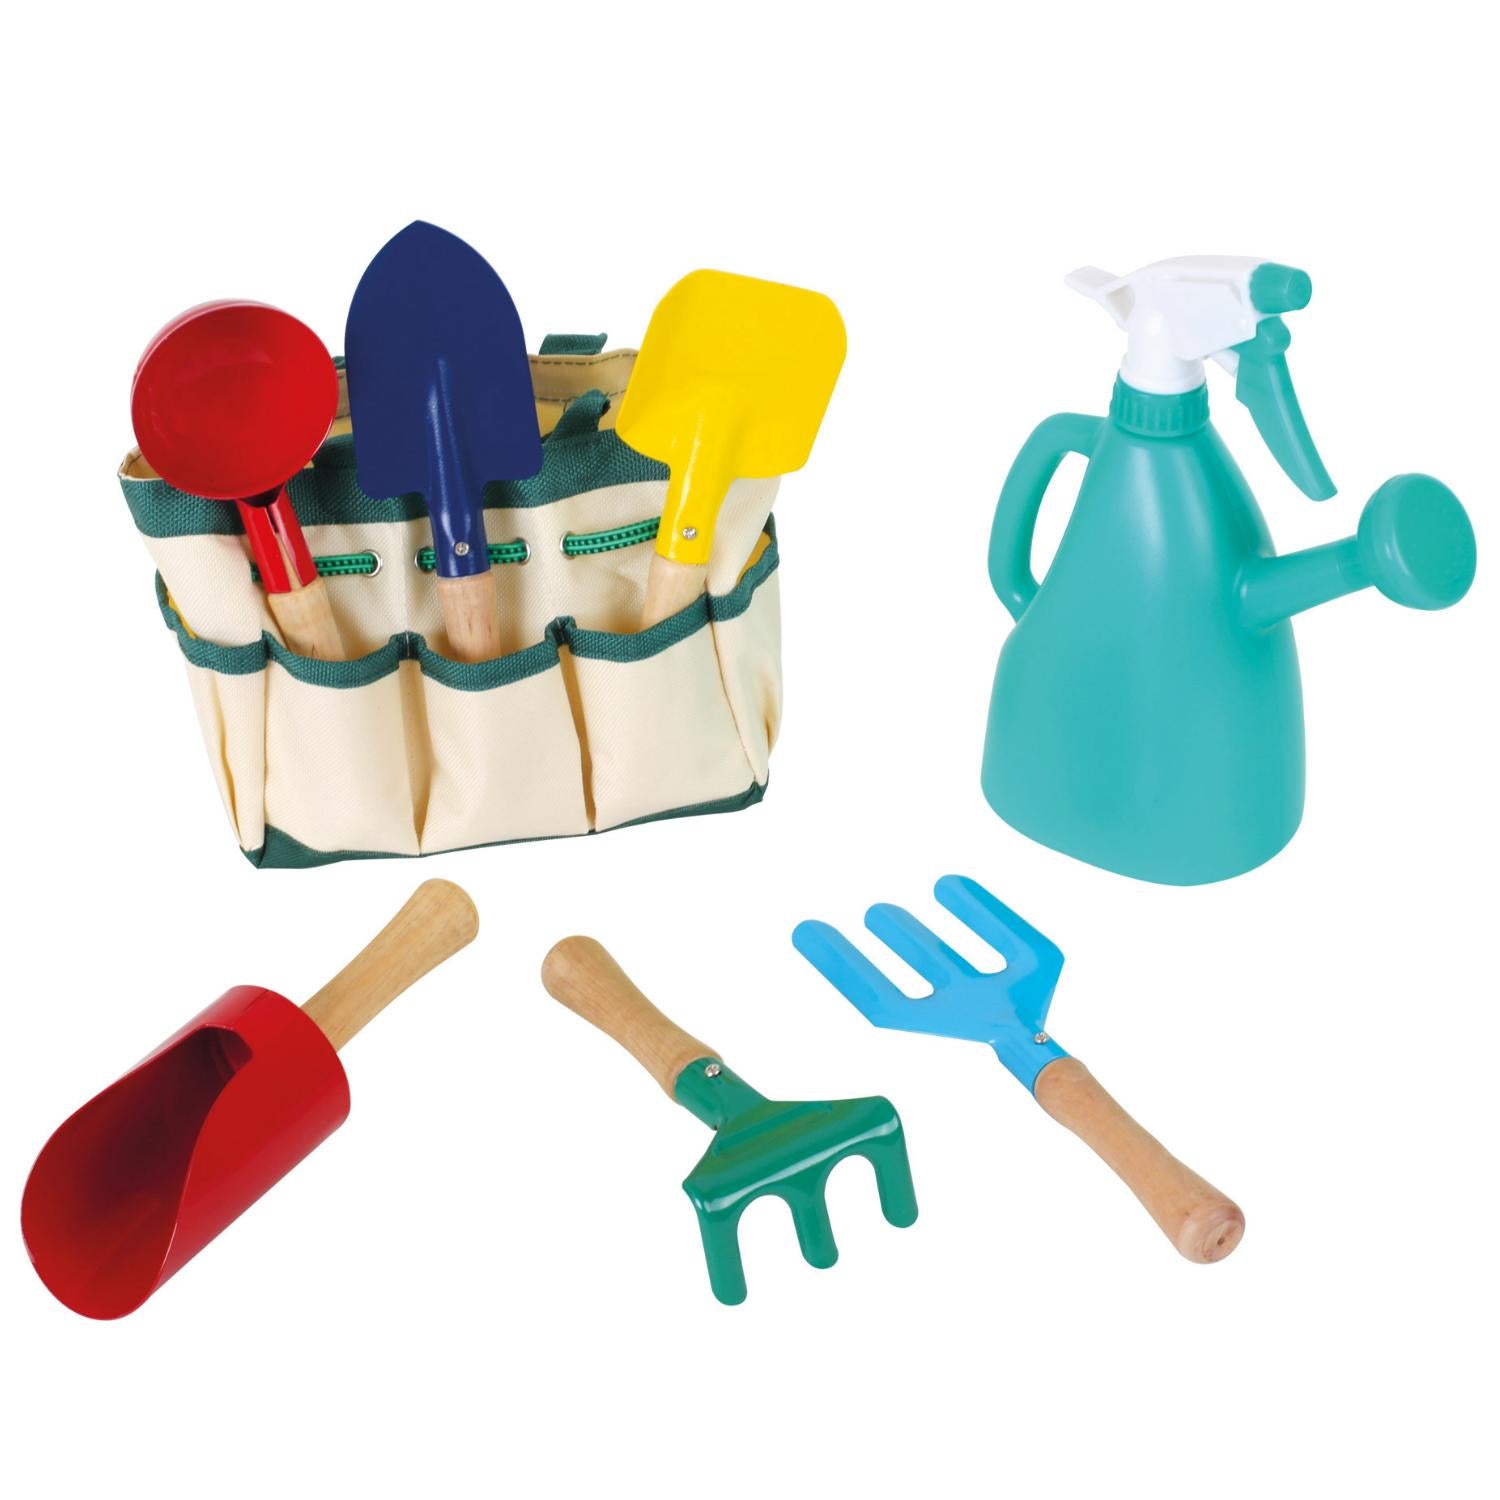 Legler Toys Kids Garden Tools or Beach Toy Set with Carry Bag | Outdoor & Gardening | Front View – Some Tools in Bag | BeoVERDE.ie